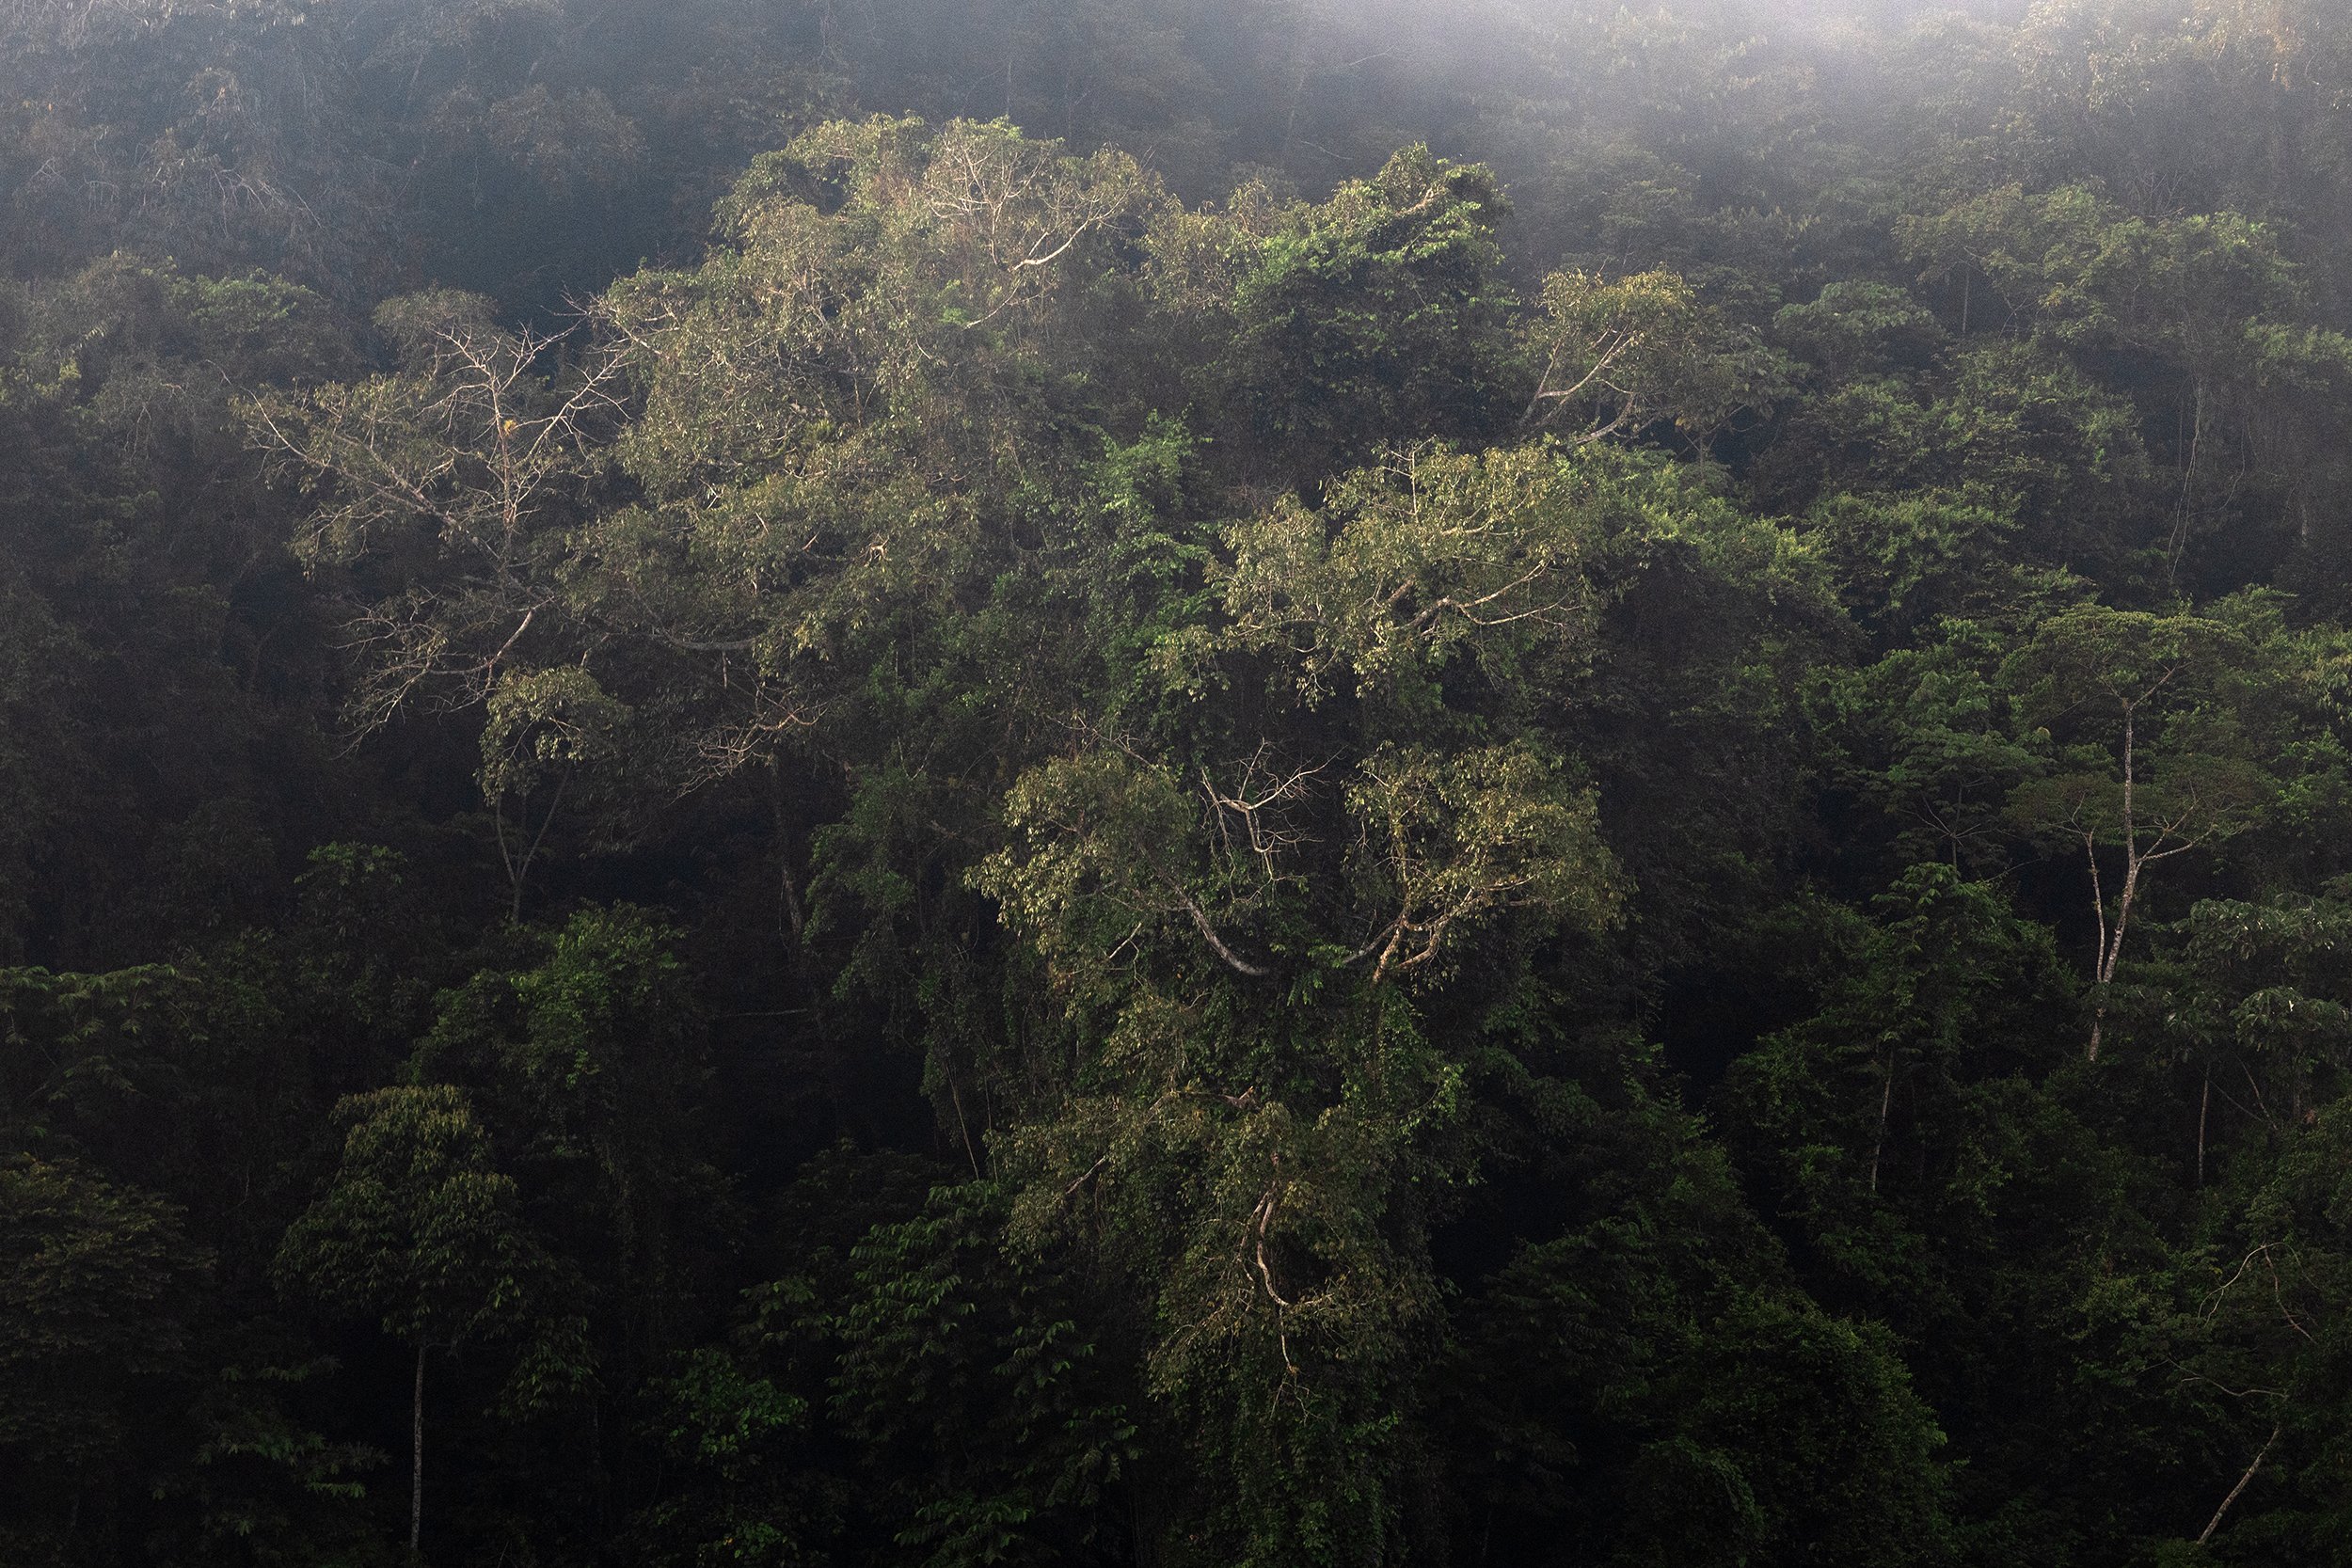  A view of the so-called "Nucleo" or core zone of the Río Plátano Biosphere Reserve, in the Gracias A Dios Department, Honduras.  The war on drugs has altered the incentives of criminal organizations to operate in remote protected areas, which provid